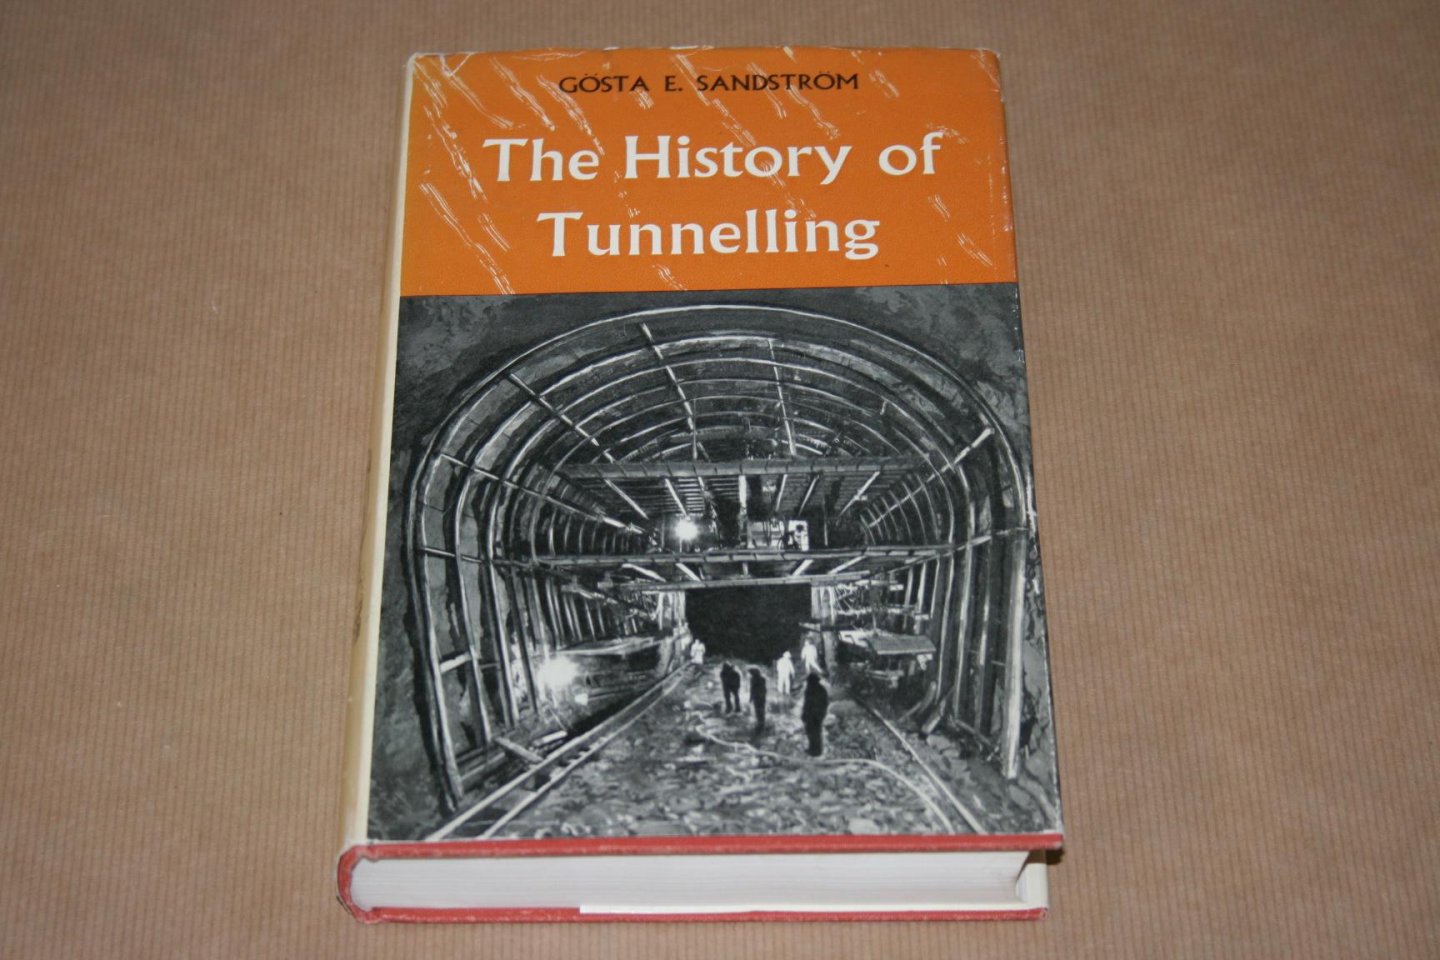 G.E. Sandström - The history of Tunnelling   -  Underground workings through the ages